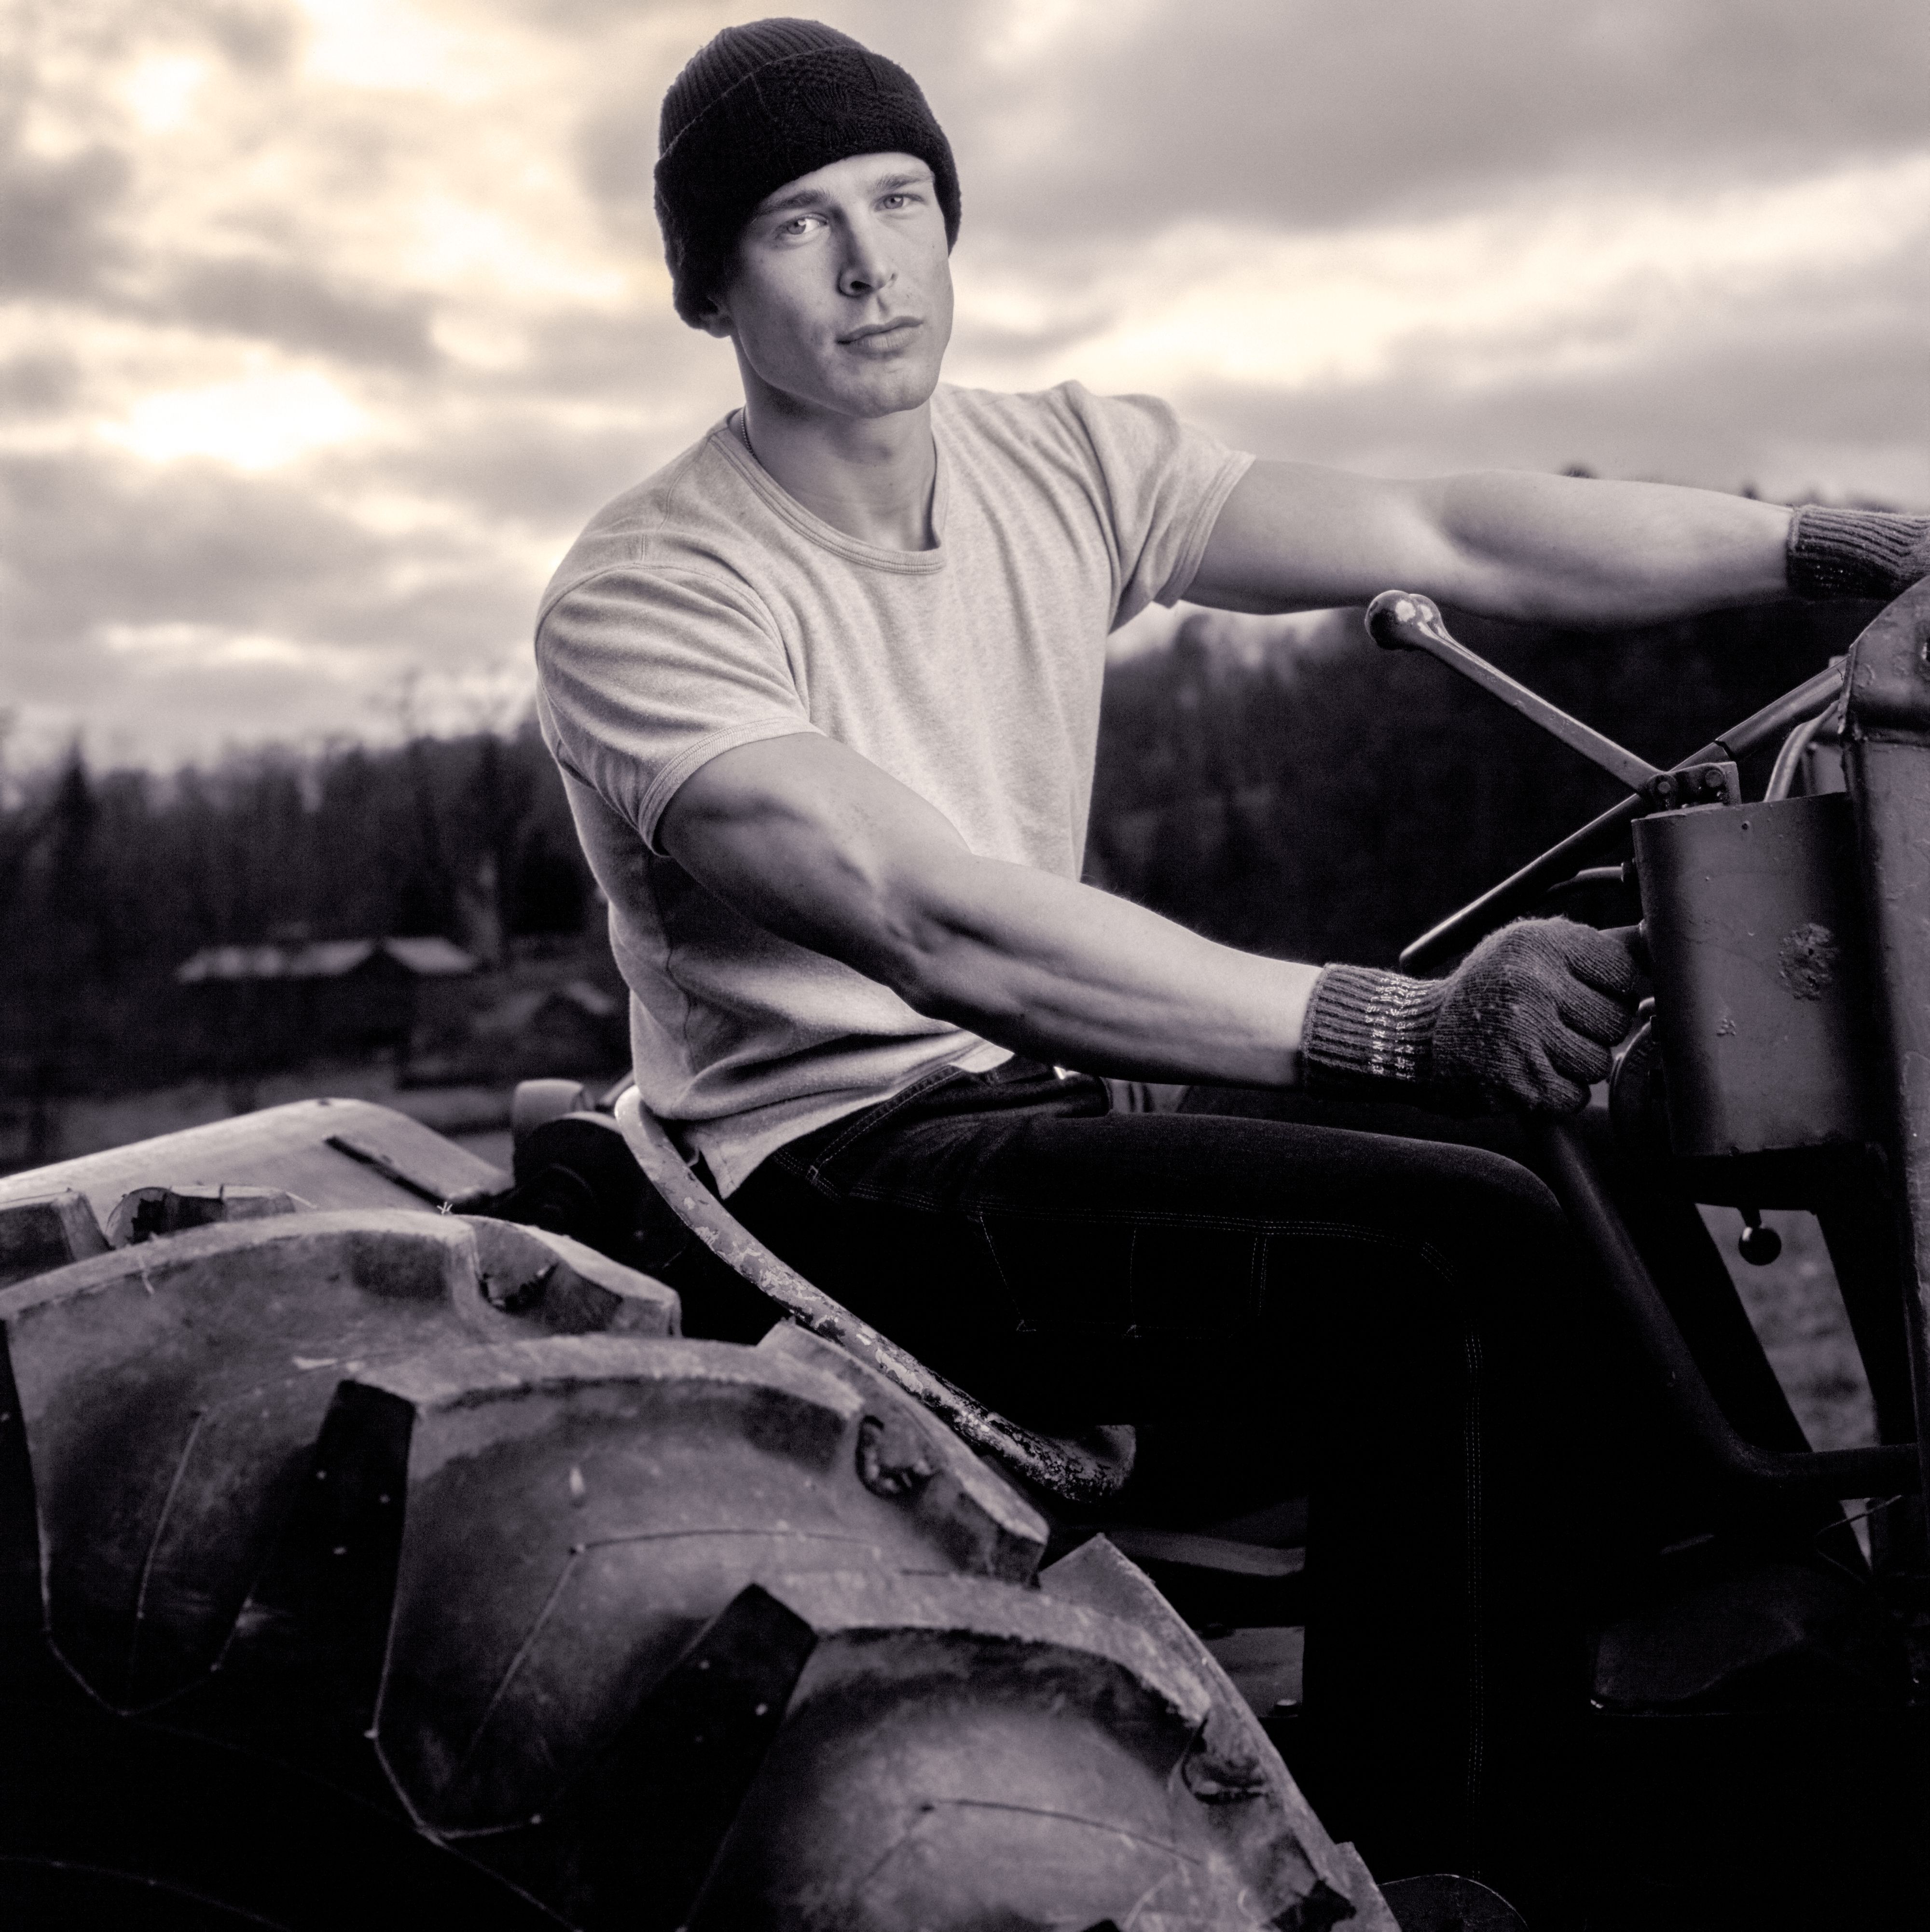 B&W portrait of man wearing hat and t-shirt on tractor